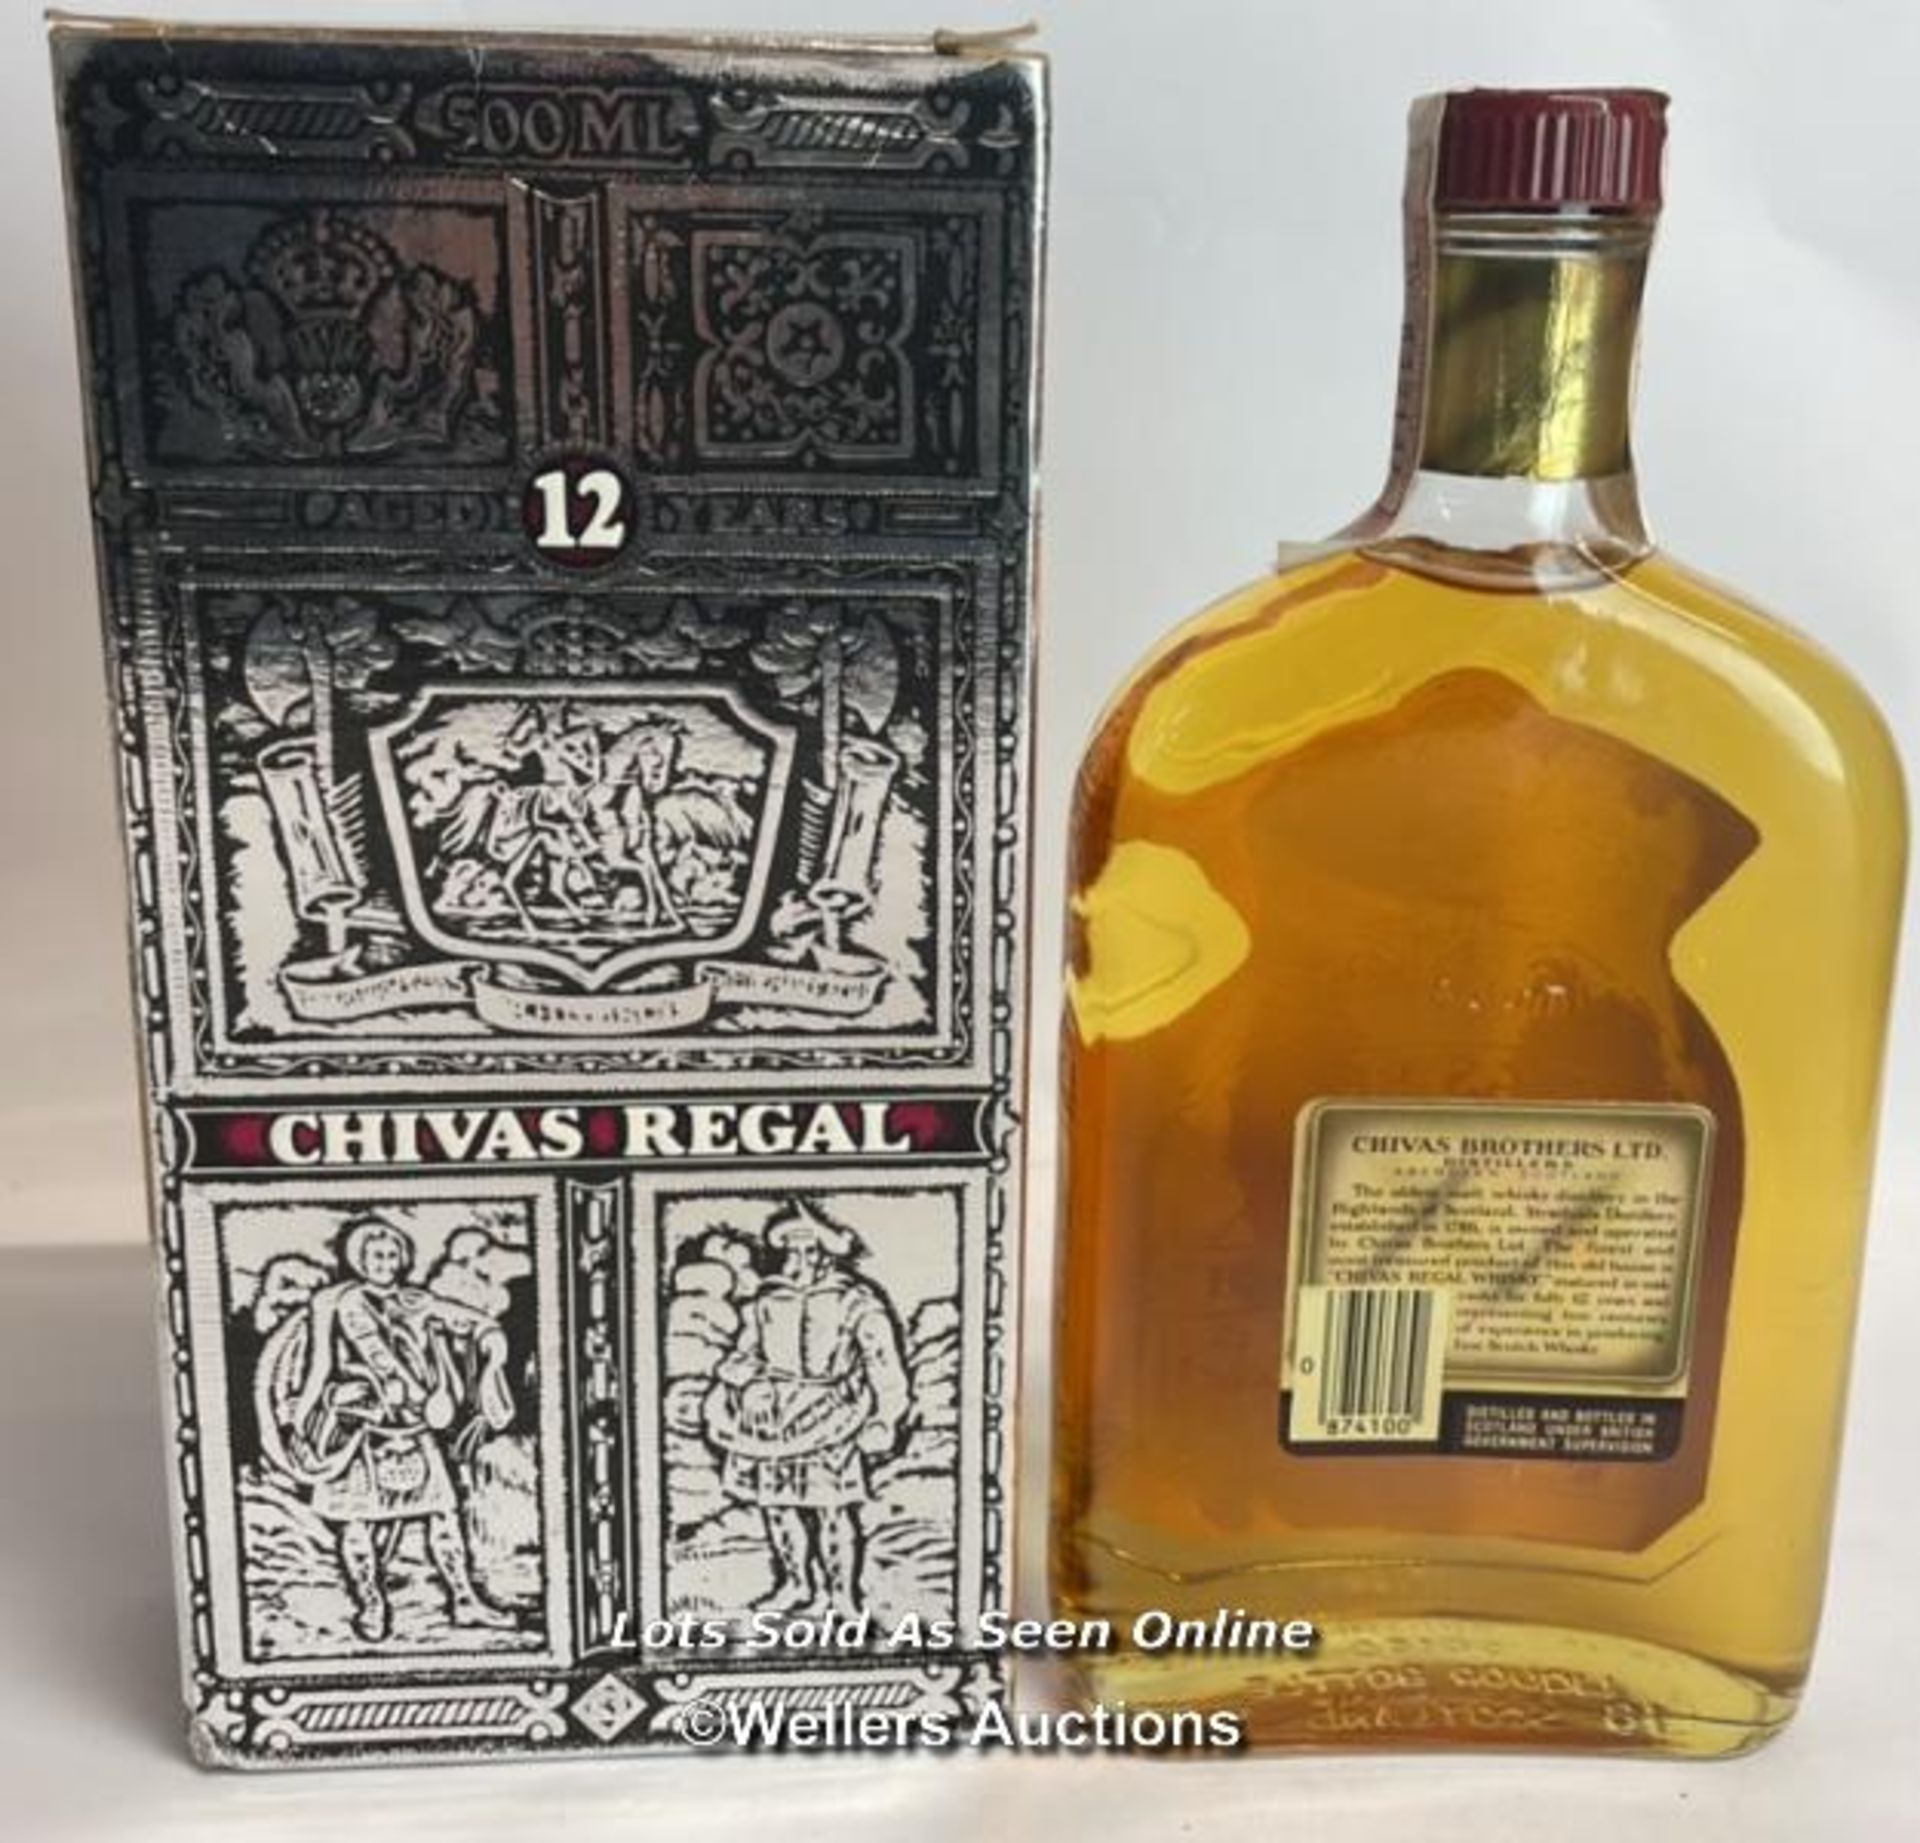 Chivas Regal Blended Scotch Whisky, Aged 12 Years, 50cl, 43% vol, In original box / Please see - Image 2 of 6